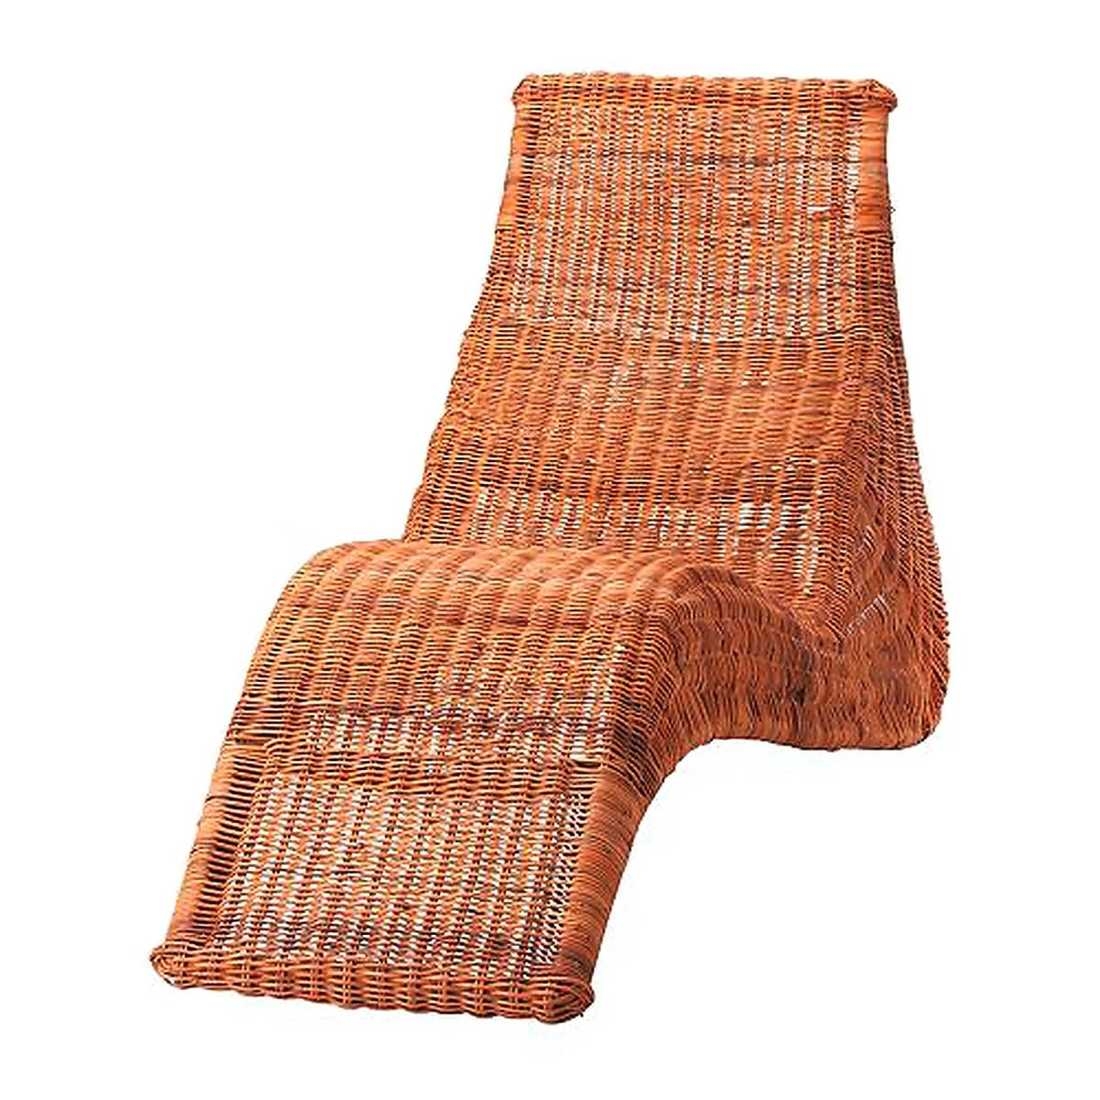 Rattan chaise lounges